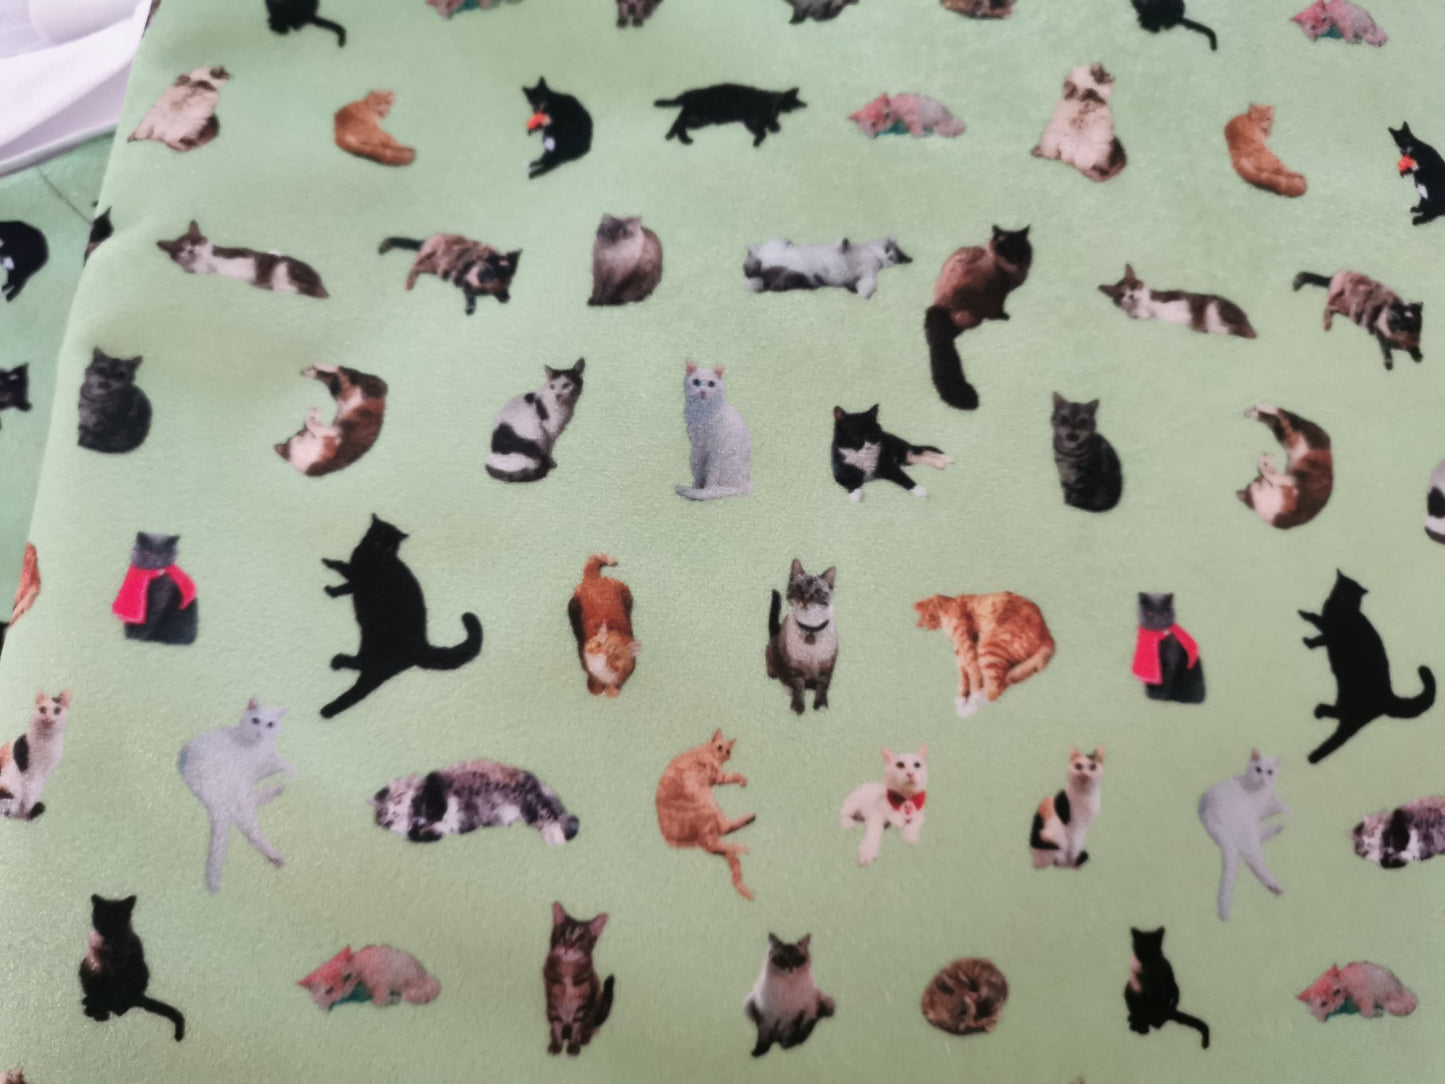 Meow fabrics, napkins and table runner